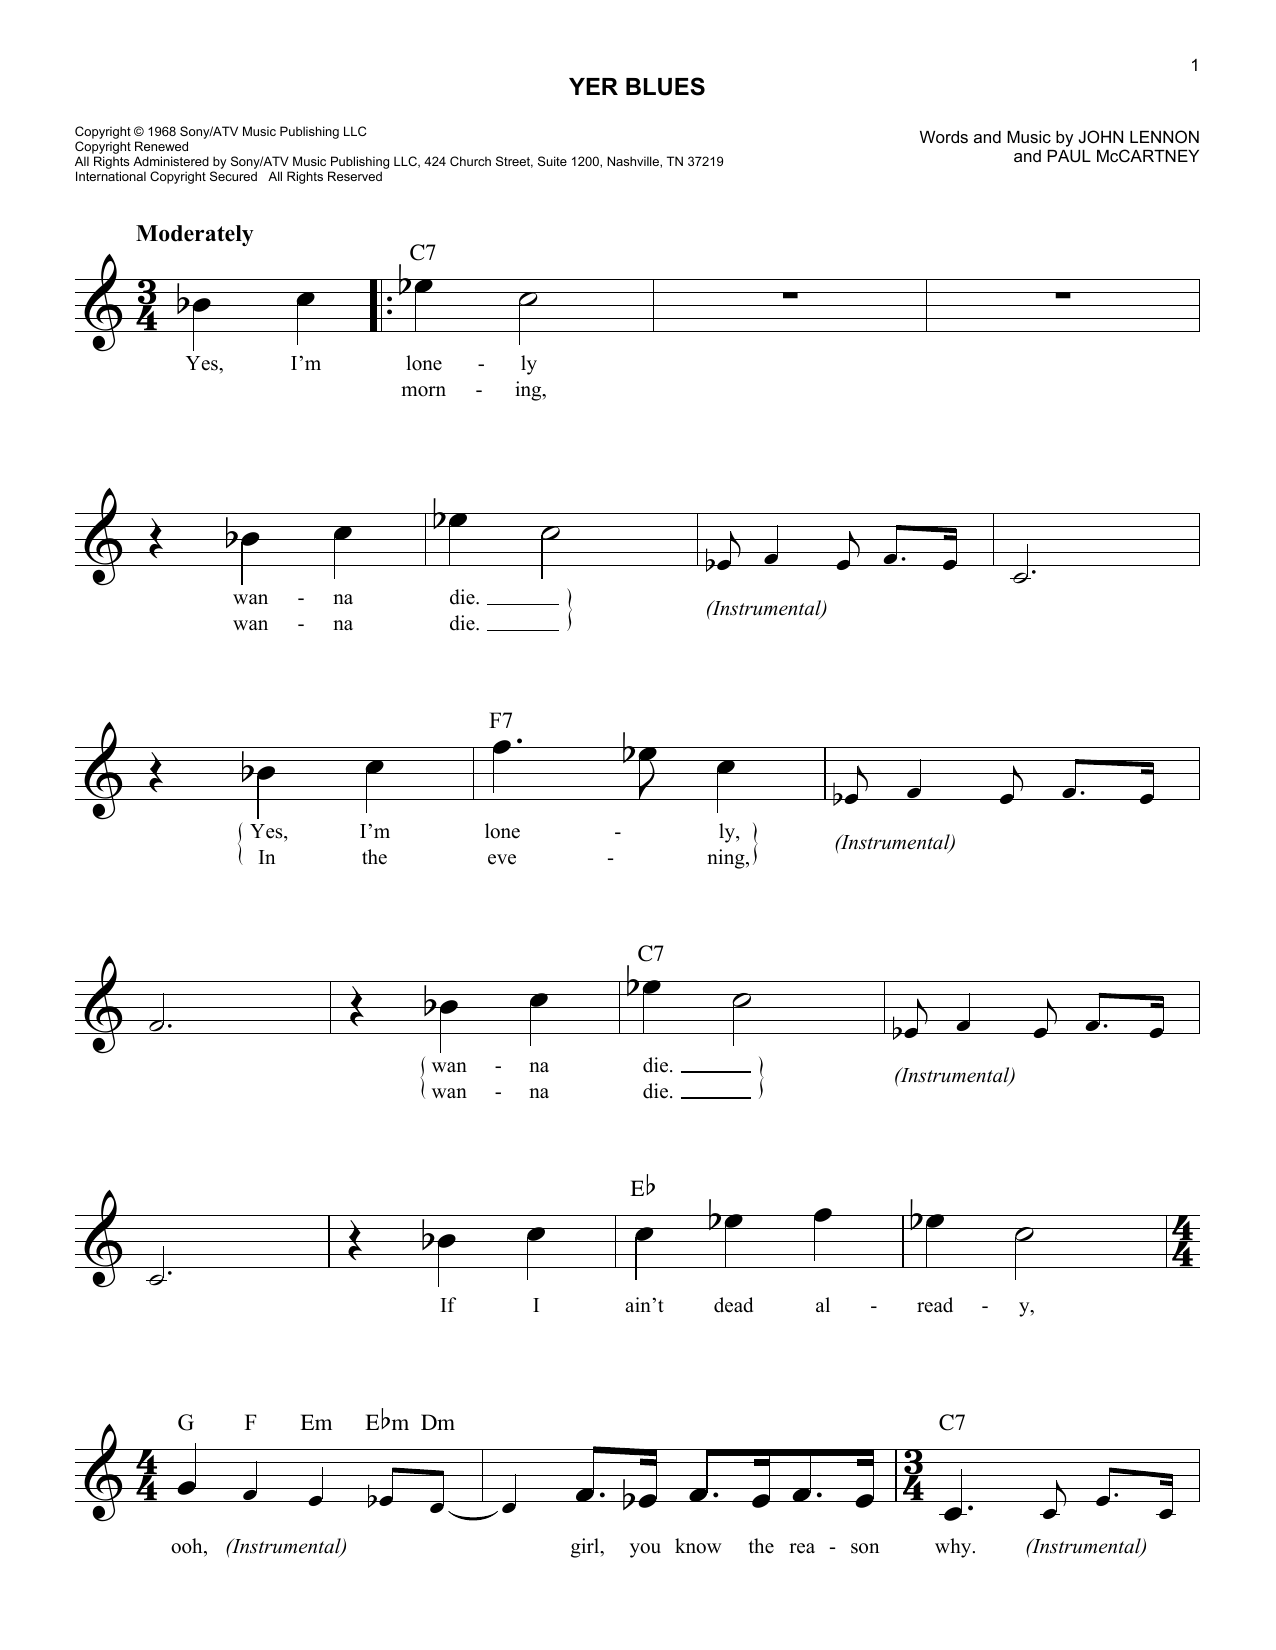 Download The Beatles Yer Blues Sheet Music